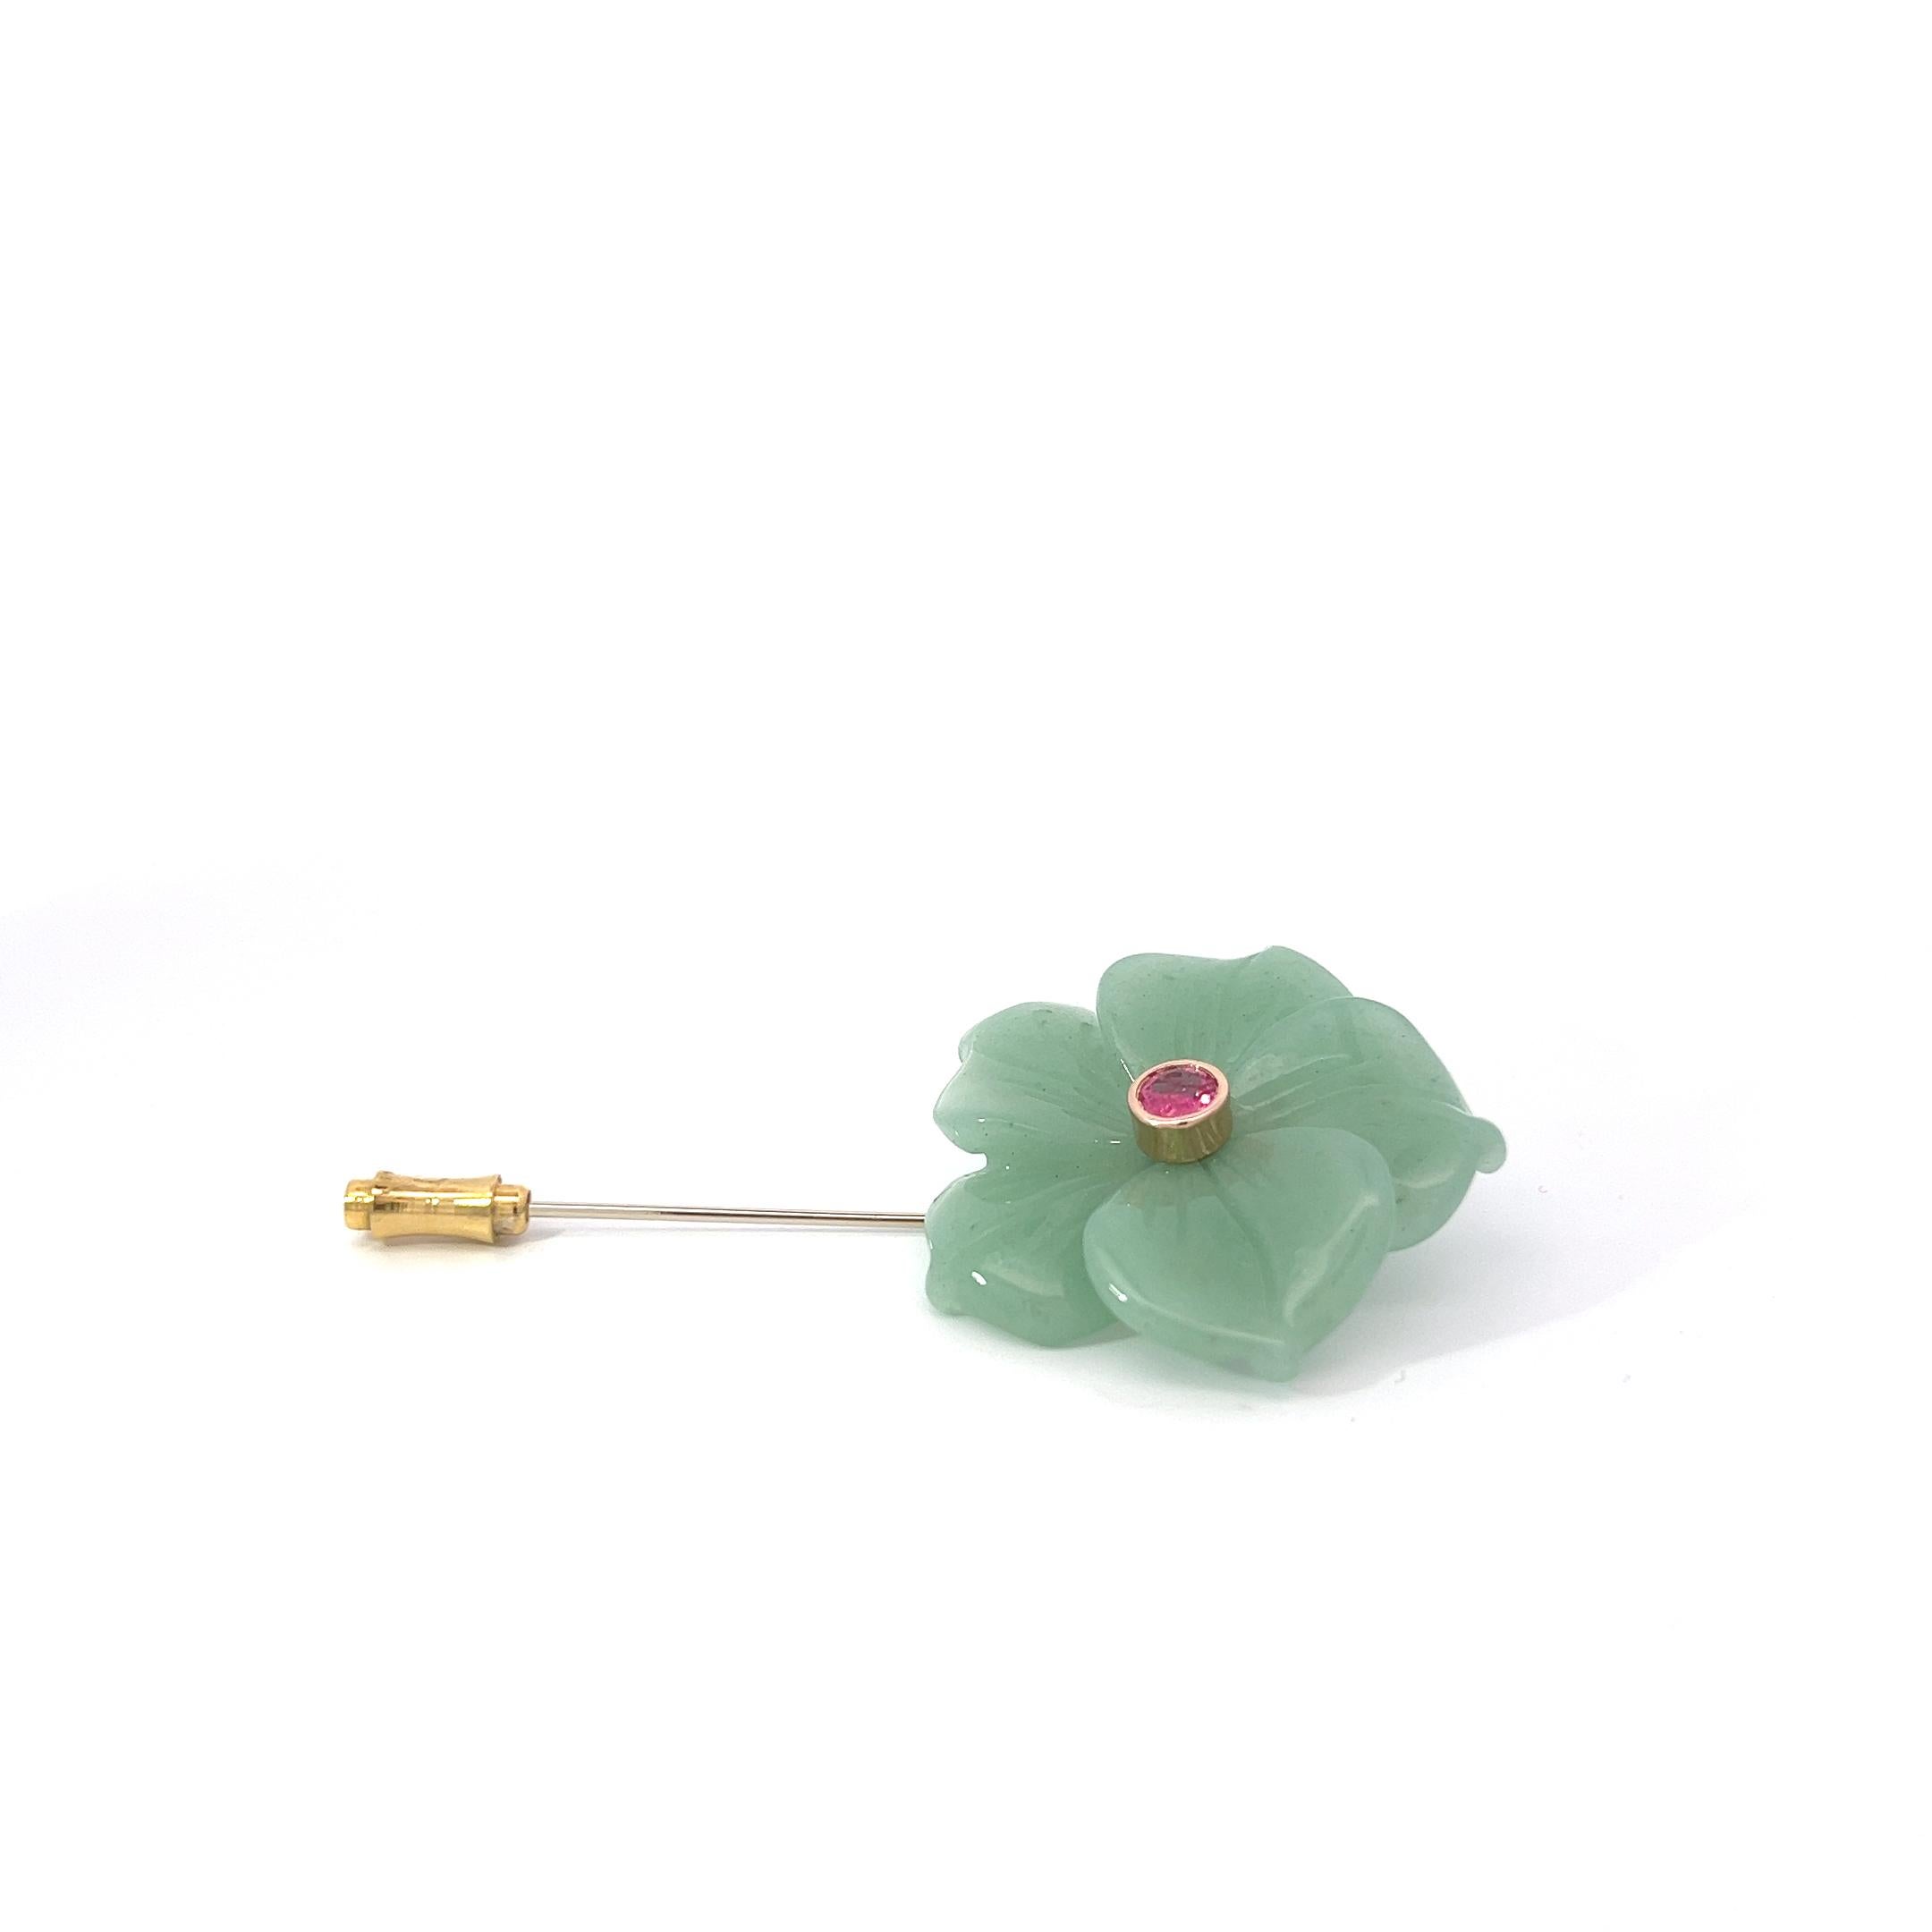 Indulge in the delicate beauty of nature with this exquisite carved aventurine stone flower stick pin, adorned with a resplendent 0.40ct pink tourmaline, all elegantly set in 18k rose gold.
Crafted with meticulous attention to detail, the aventurine